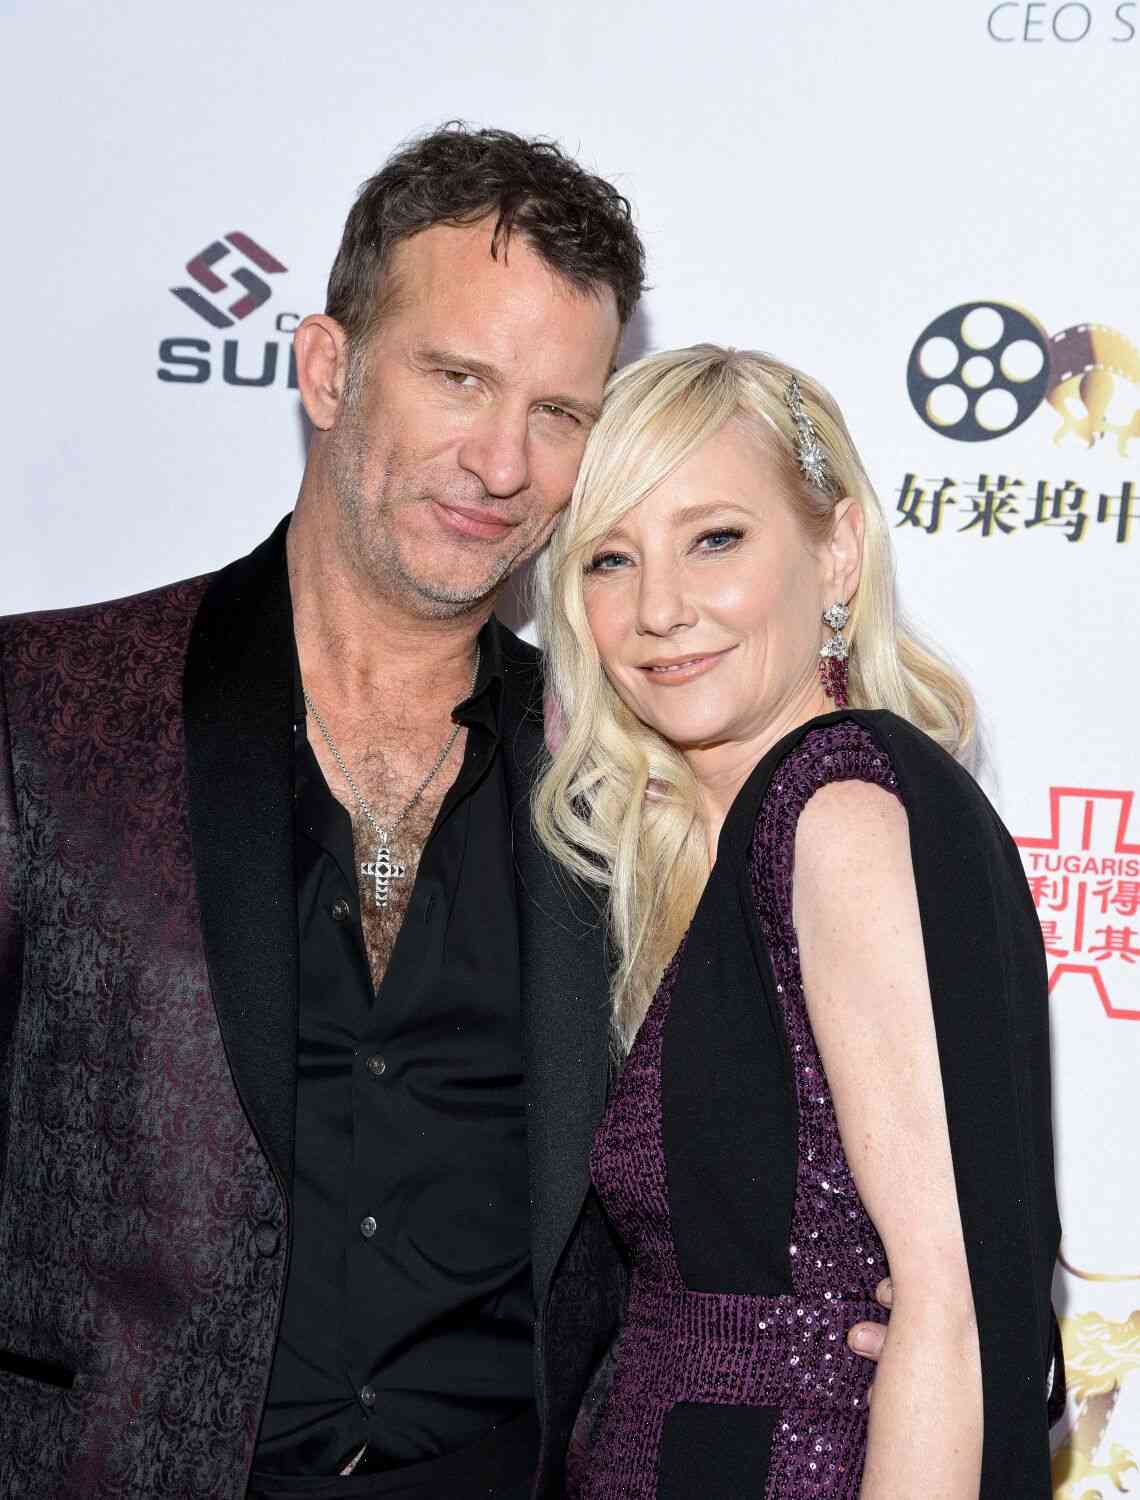 Heche's ex-husband is suing her estate for nearly $200,000 in legal fees